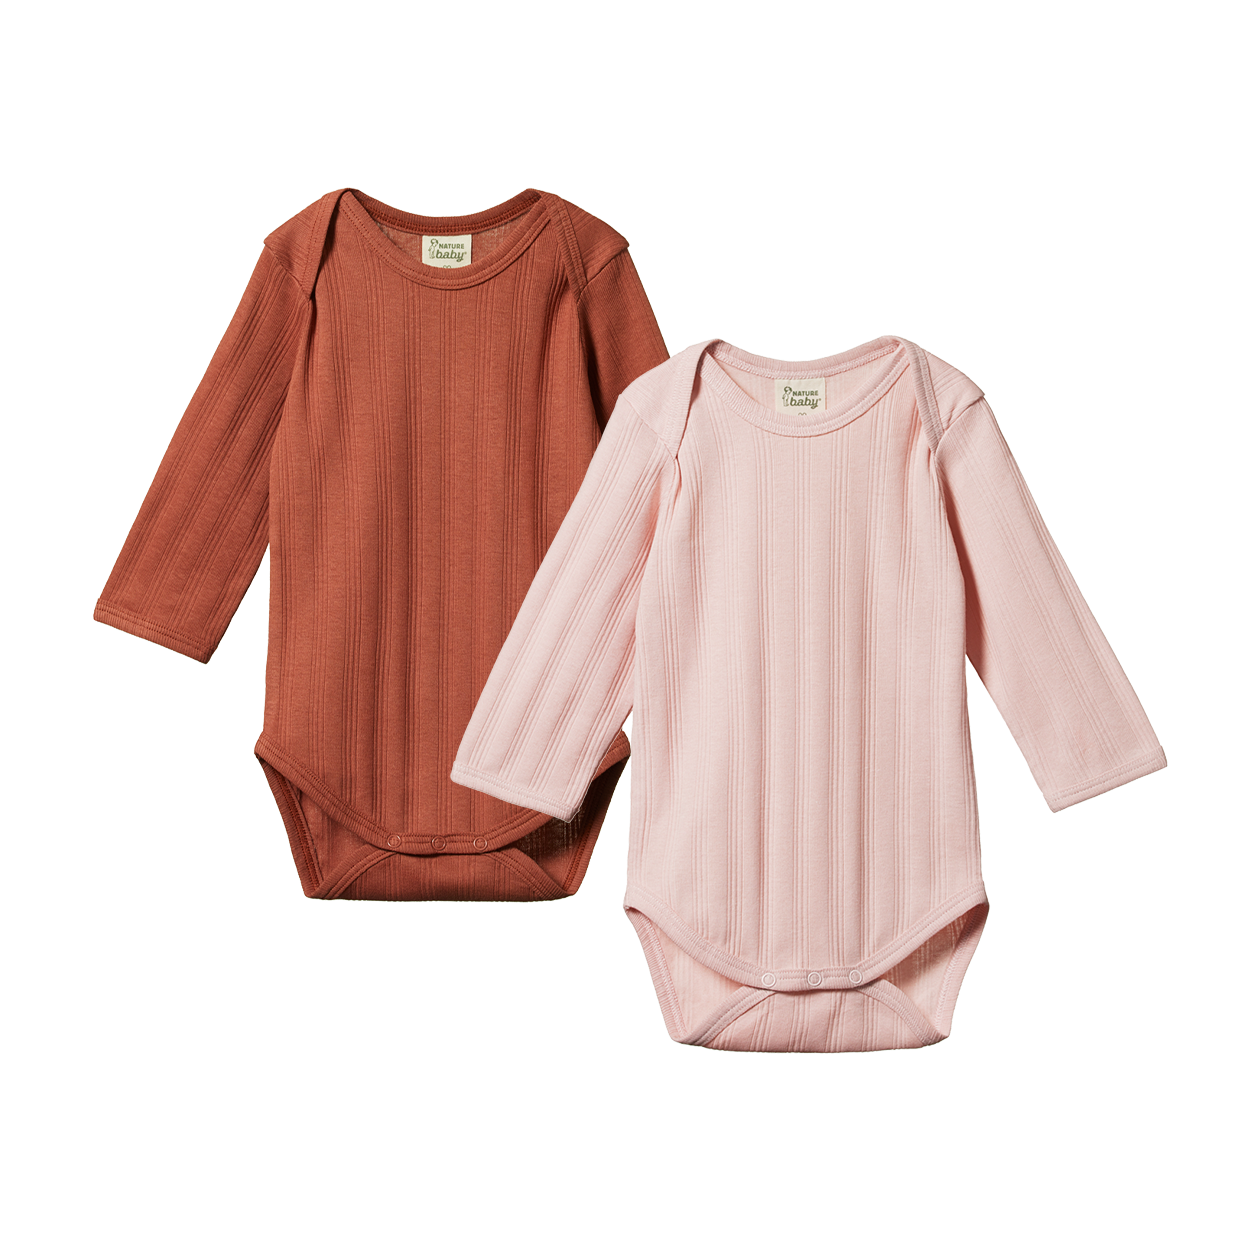 Nature Baby - 2 Pack Derby L/S Bodysuits - Rose Bud/Terracotta